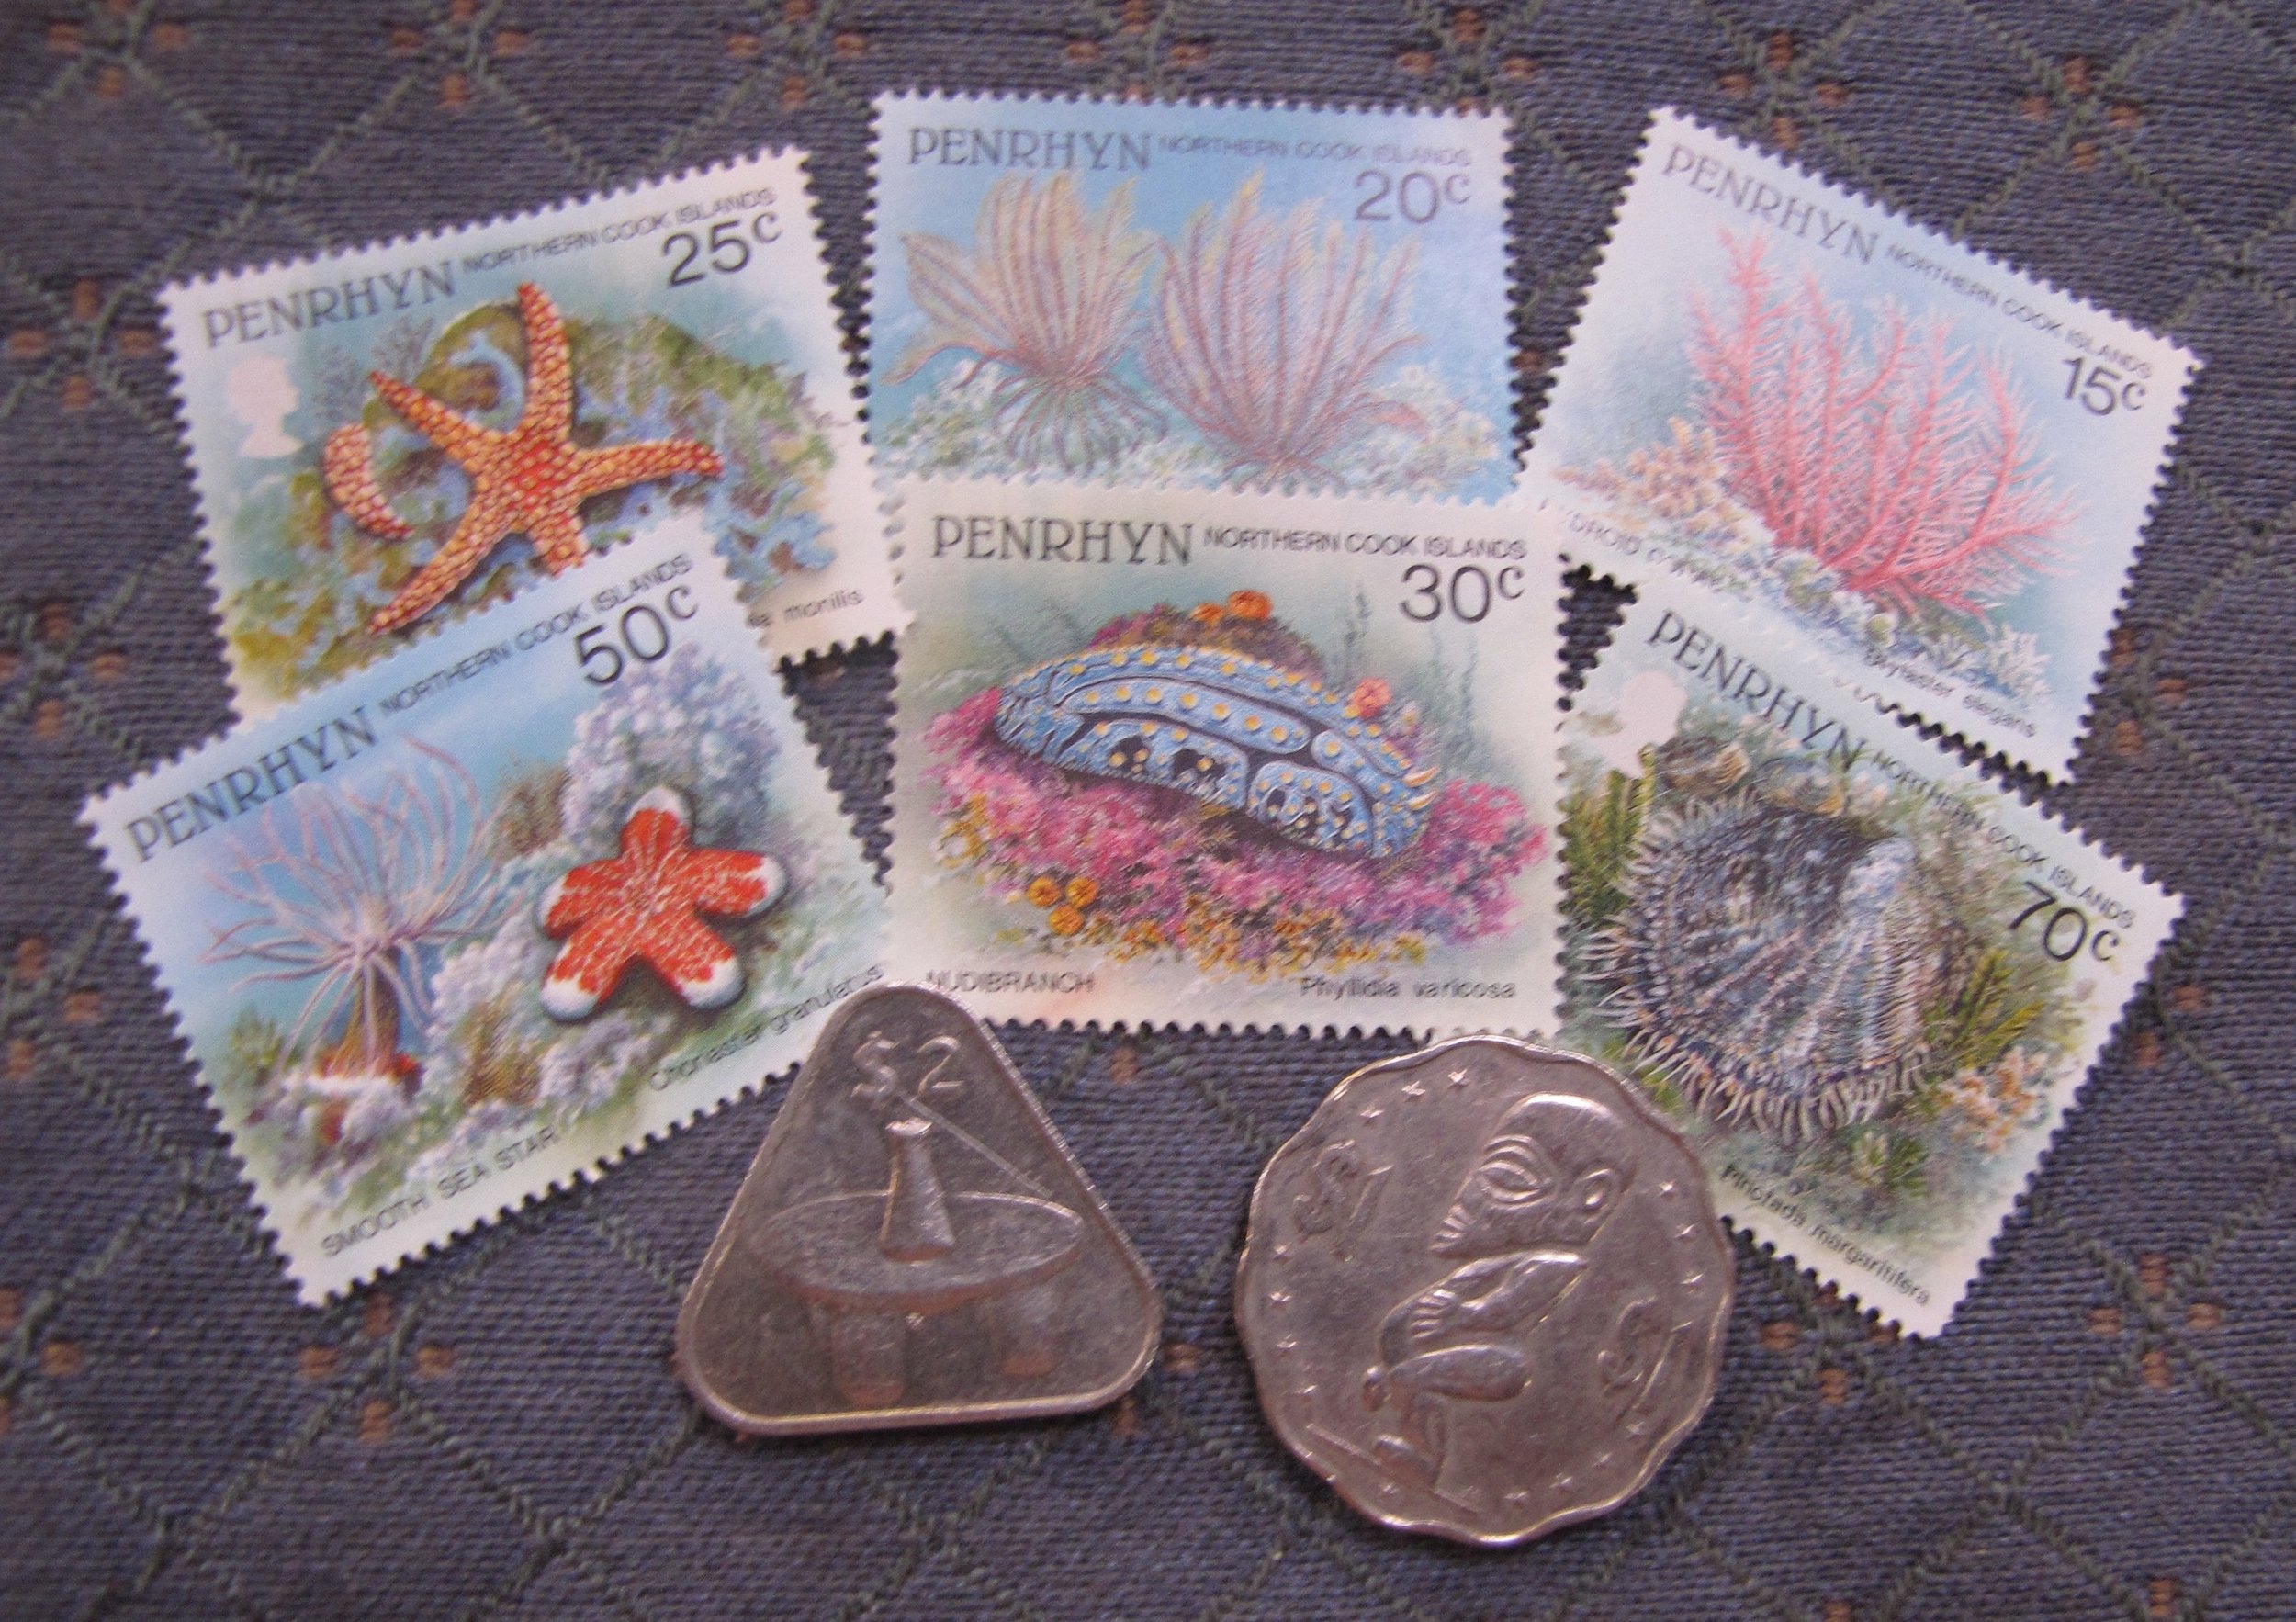 Distinctive stamps & coins